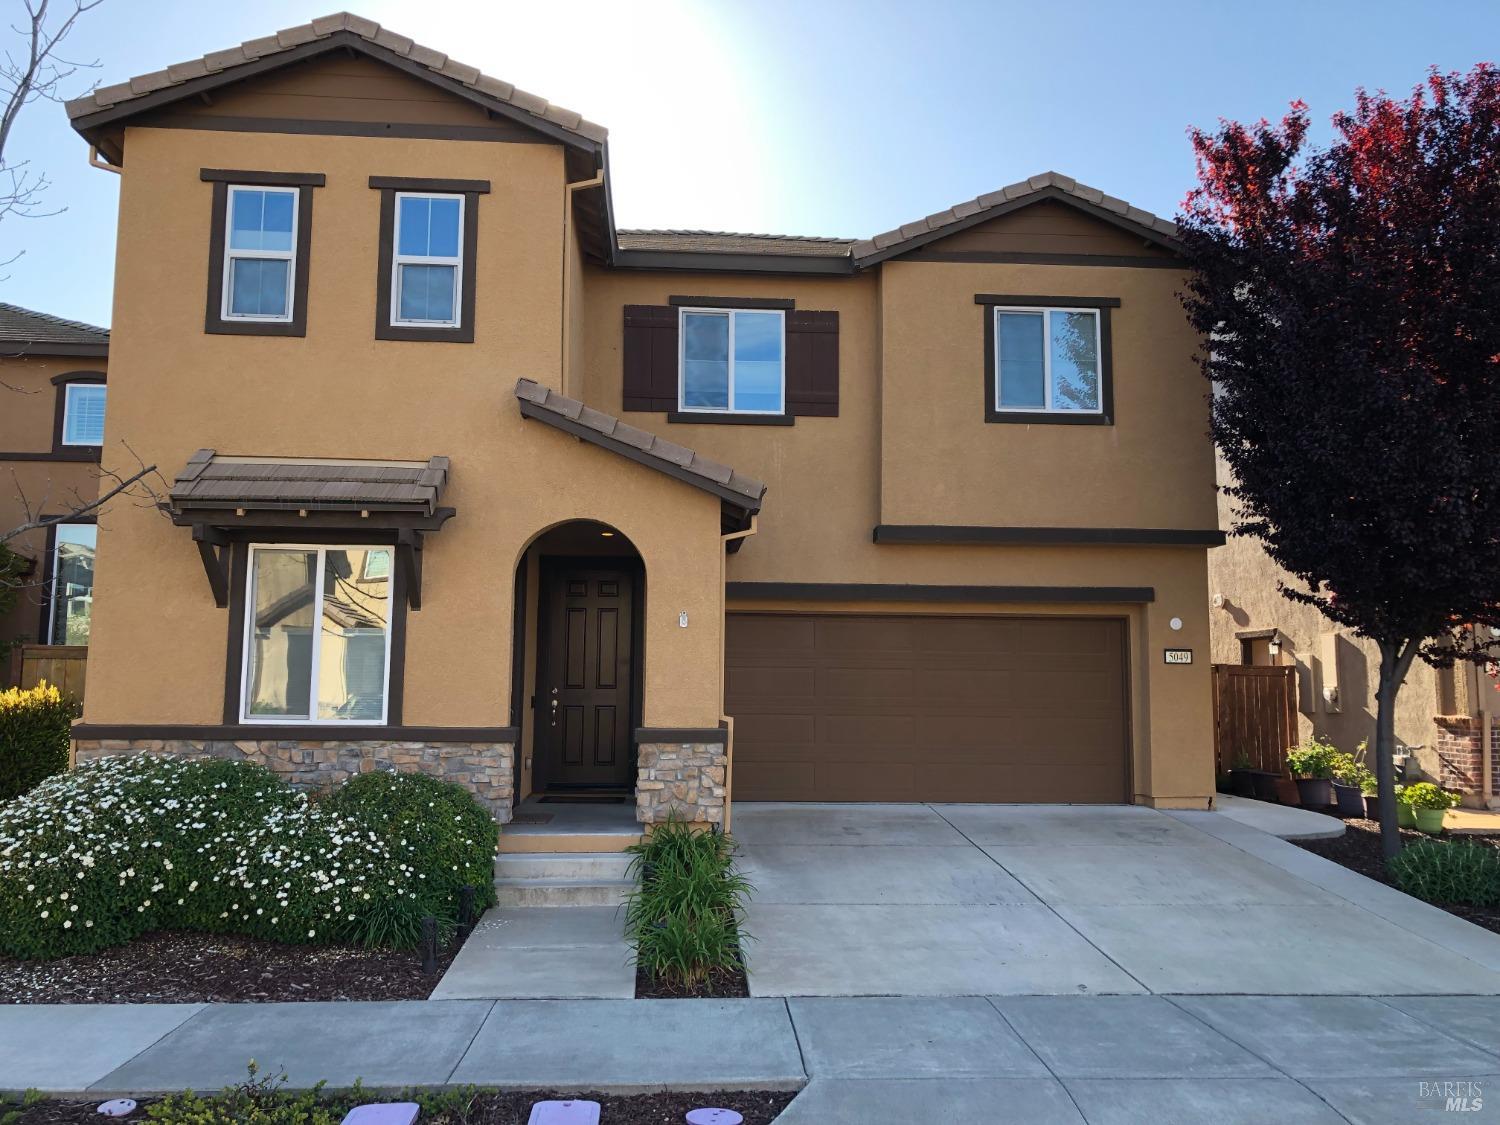 Photo of 5049 King Pl in Rohnert Park, CA